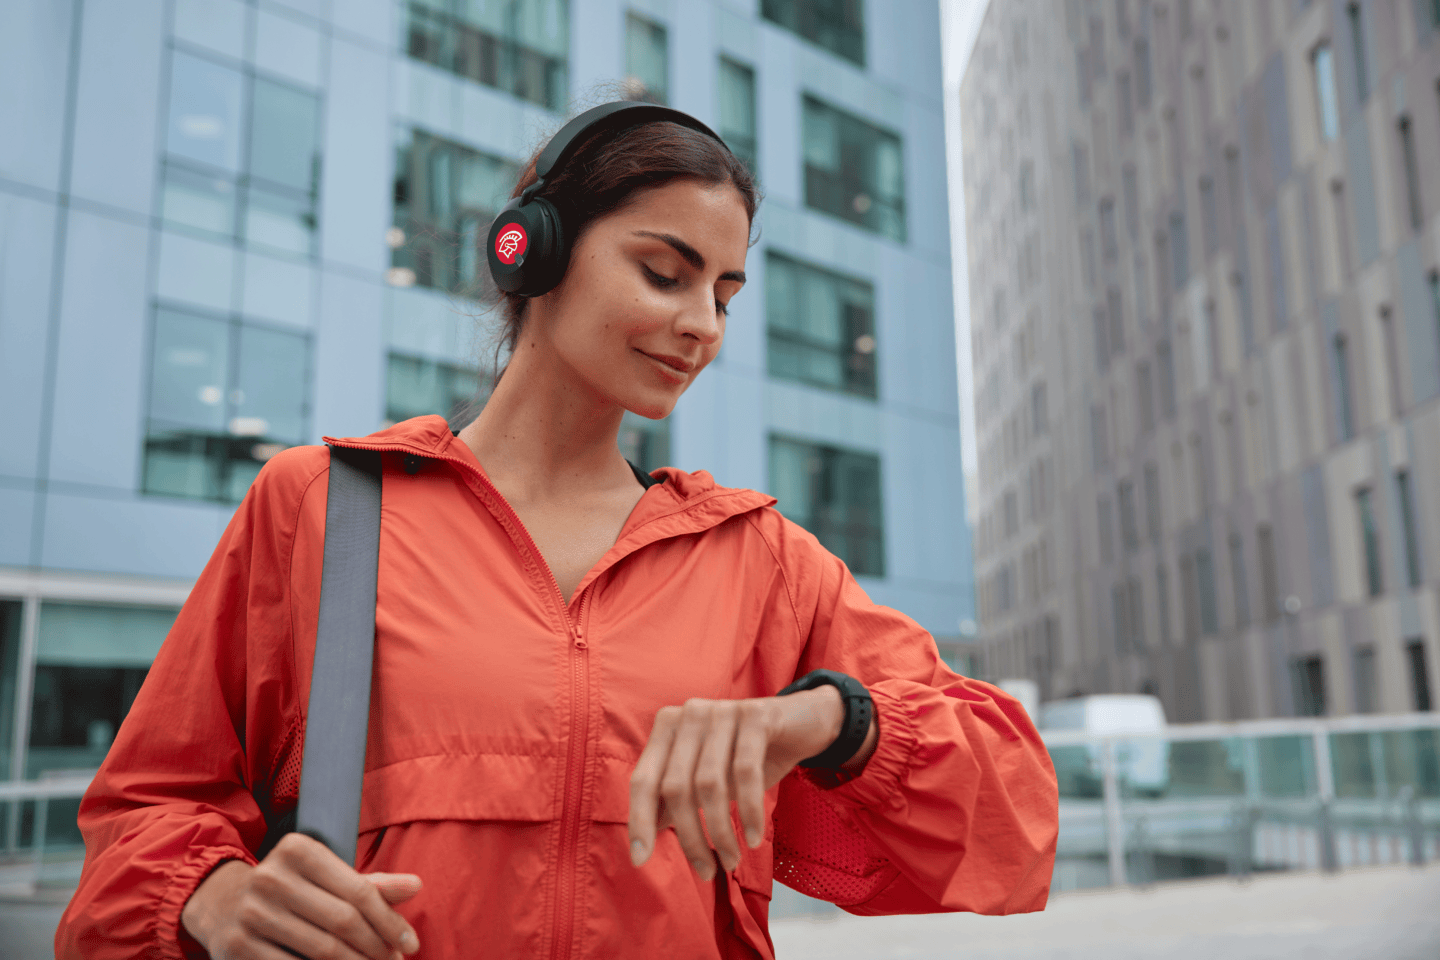 A woman listens to music with Safeguard branded headphones while looking down at her watch and standing in the middle of a city.